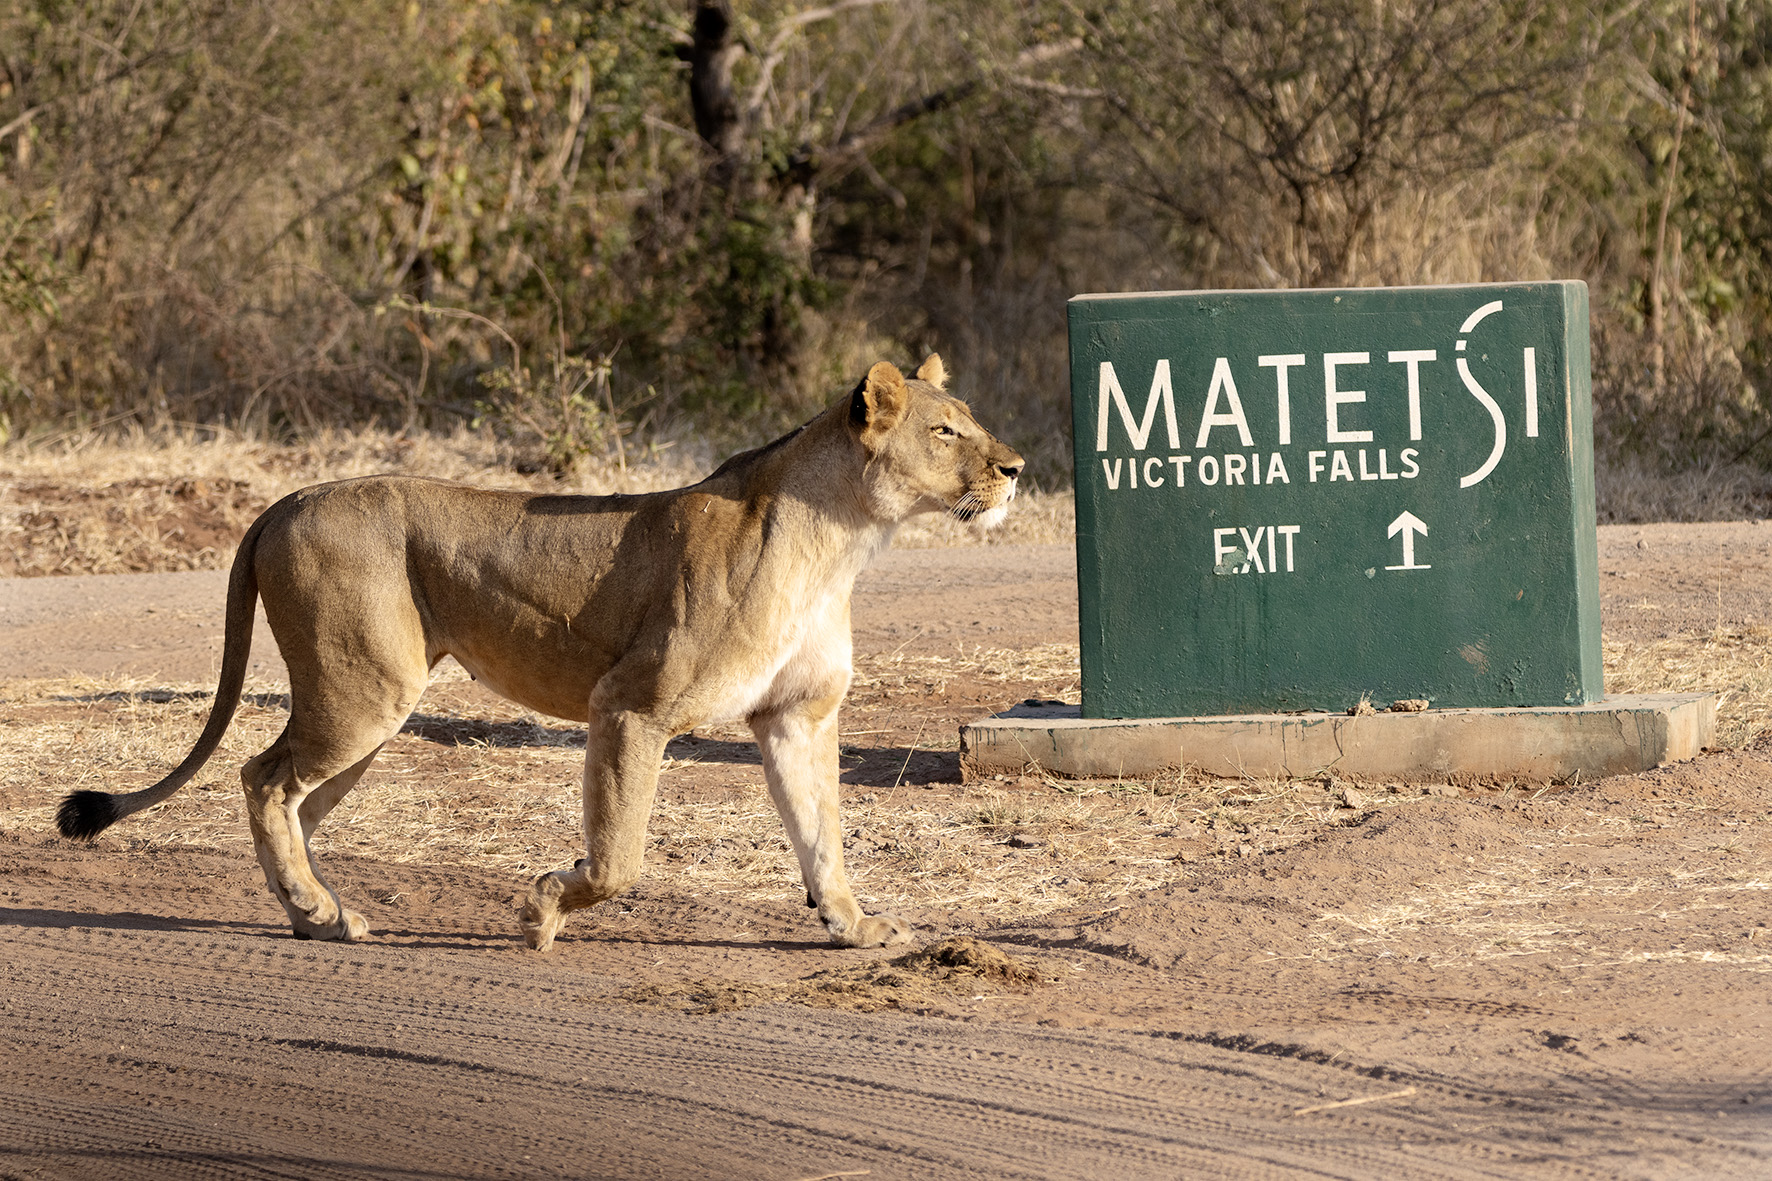 A lion passing in front of a sign in the Matetsi Private Game Reserve